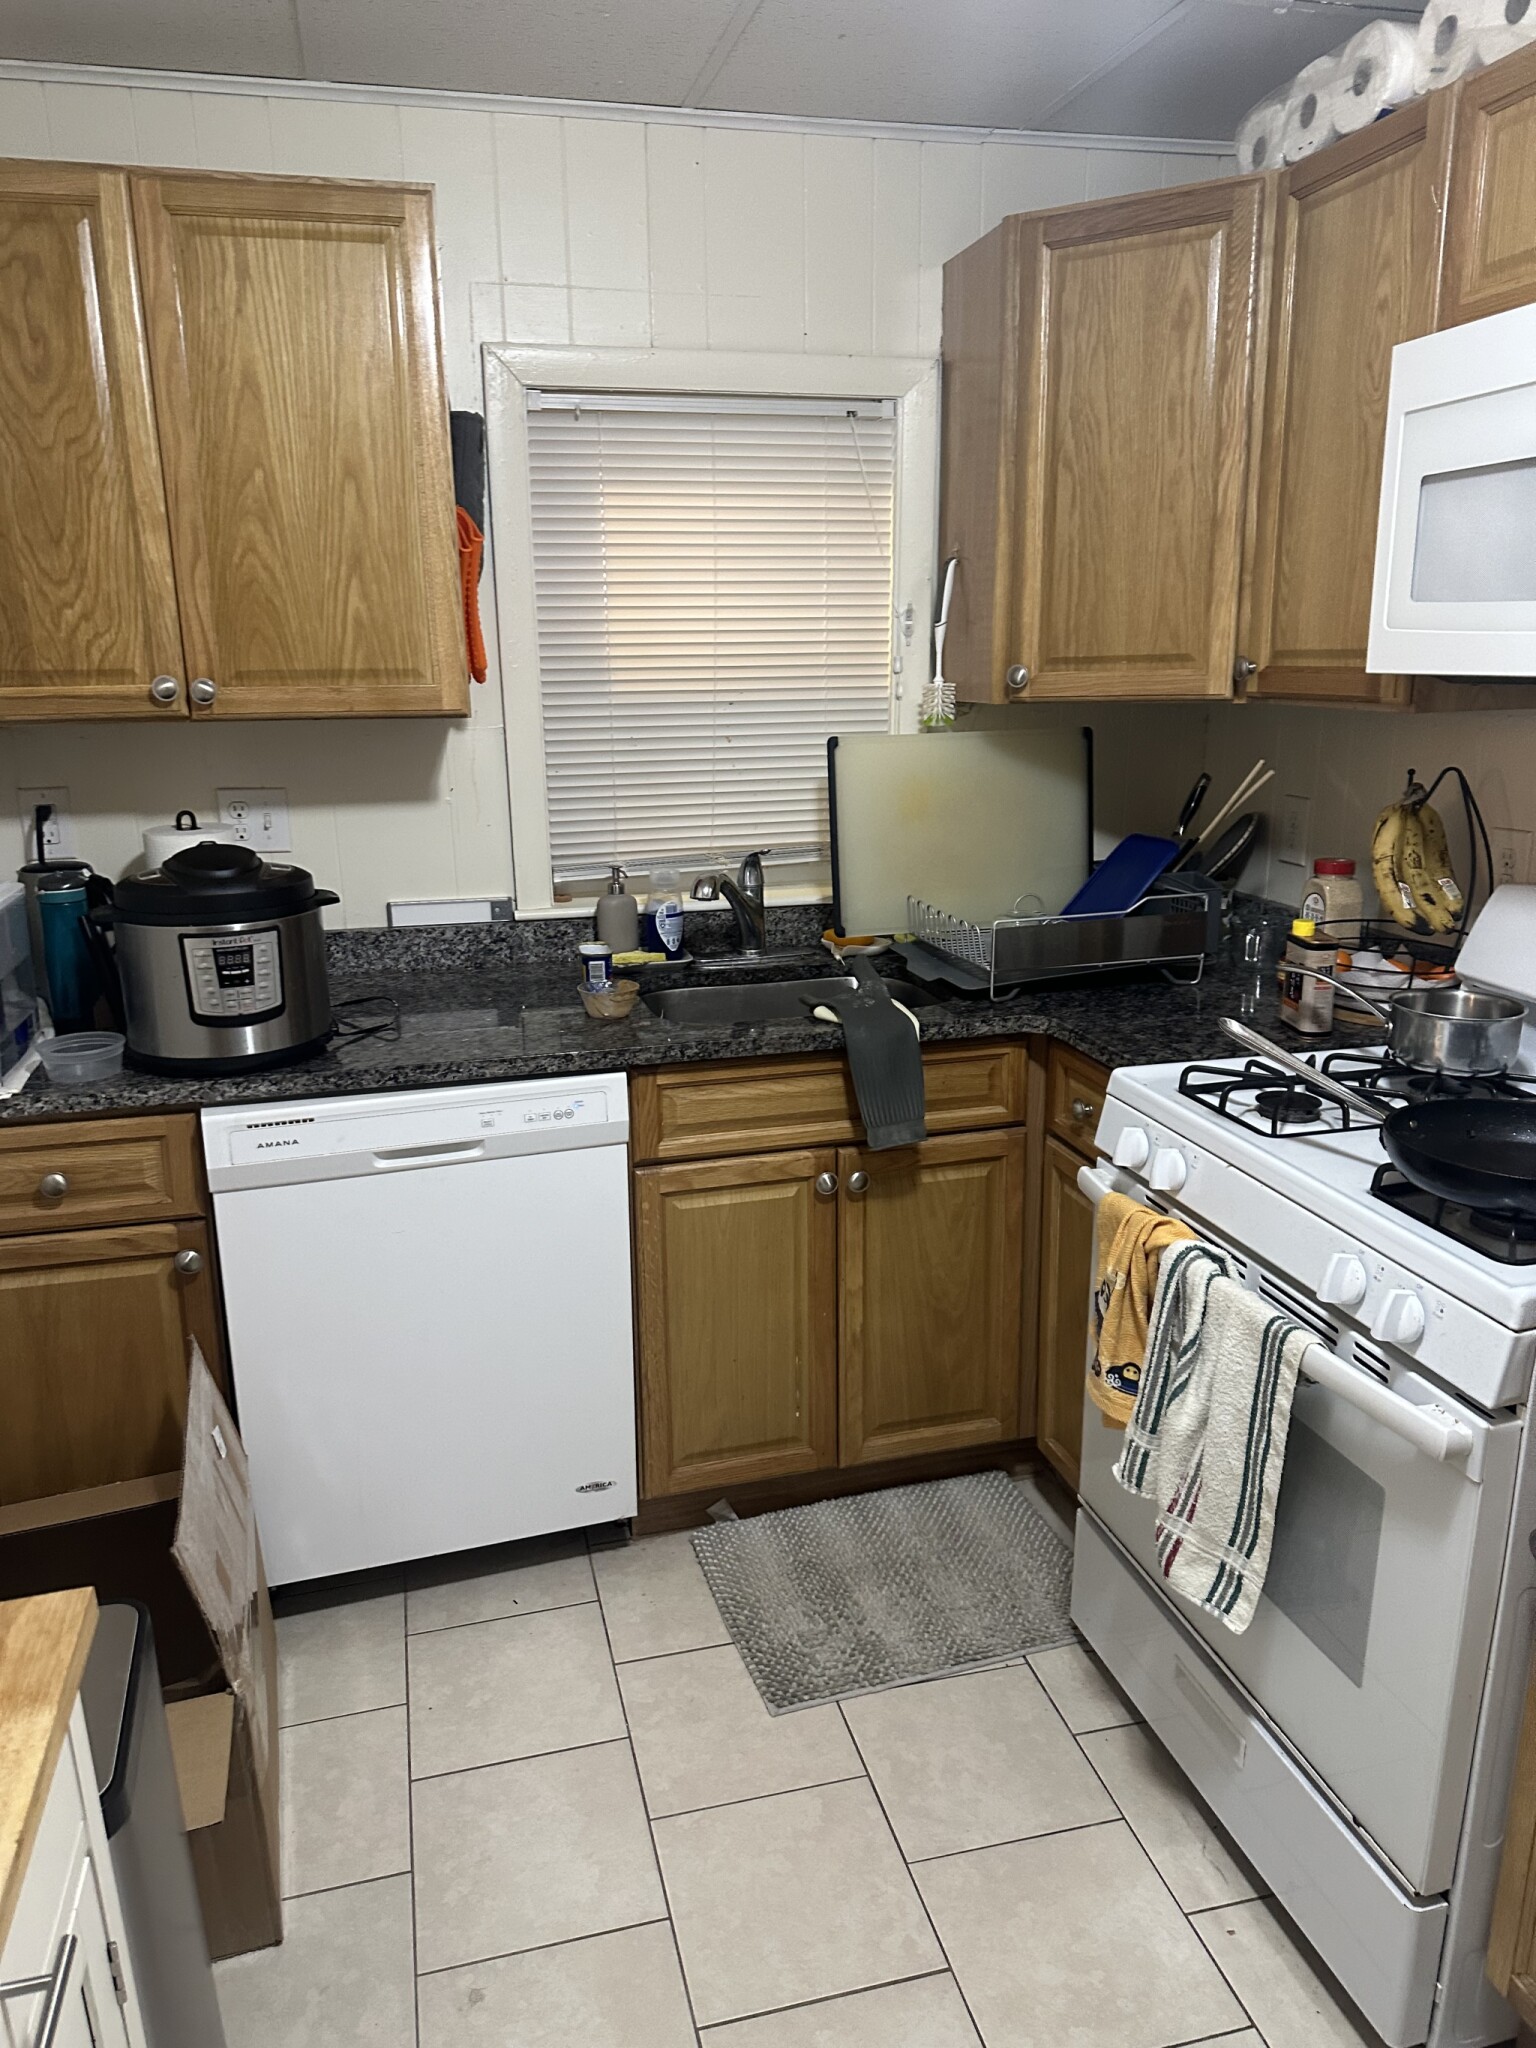 Photos of apartment on Forest St.,Cambridge MA 02140